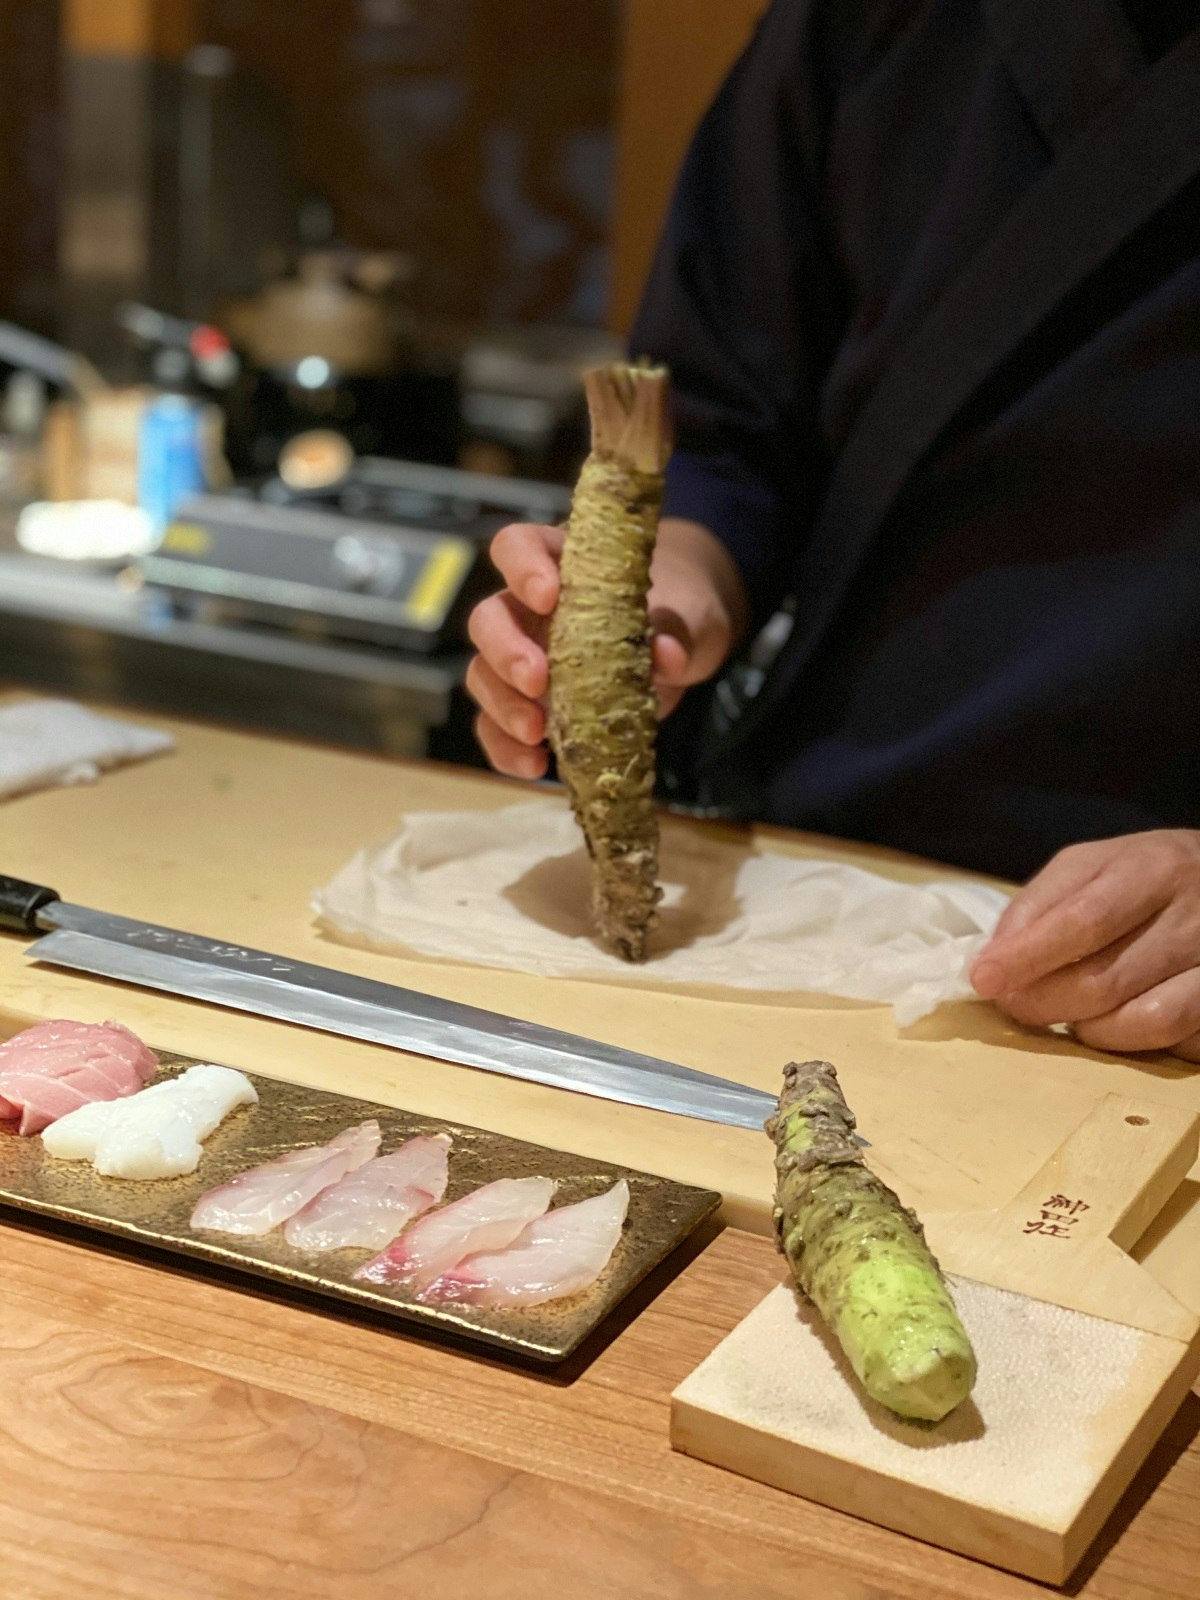 Fresh wasabi being prepared at Sake no Hana by a chef in a navy uniform. The green root is being grated on a wooden board covered with shark skin.